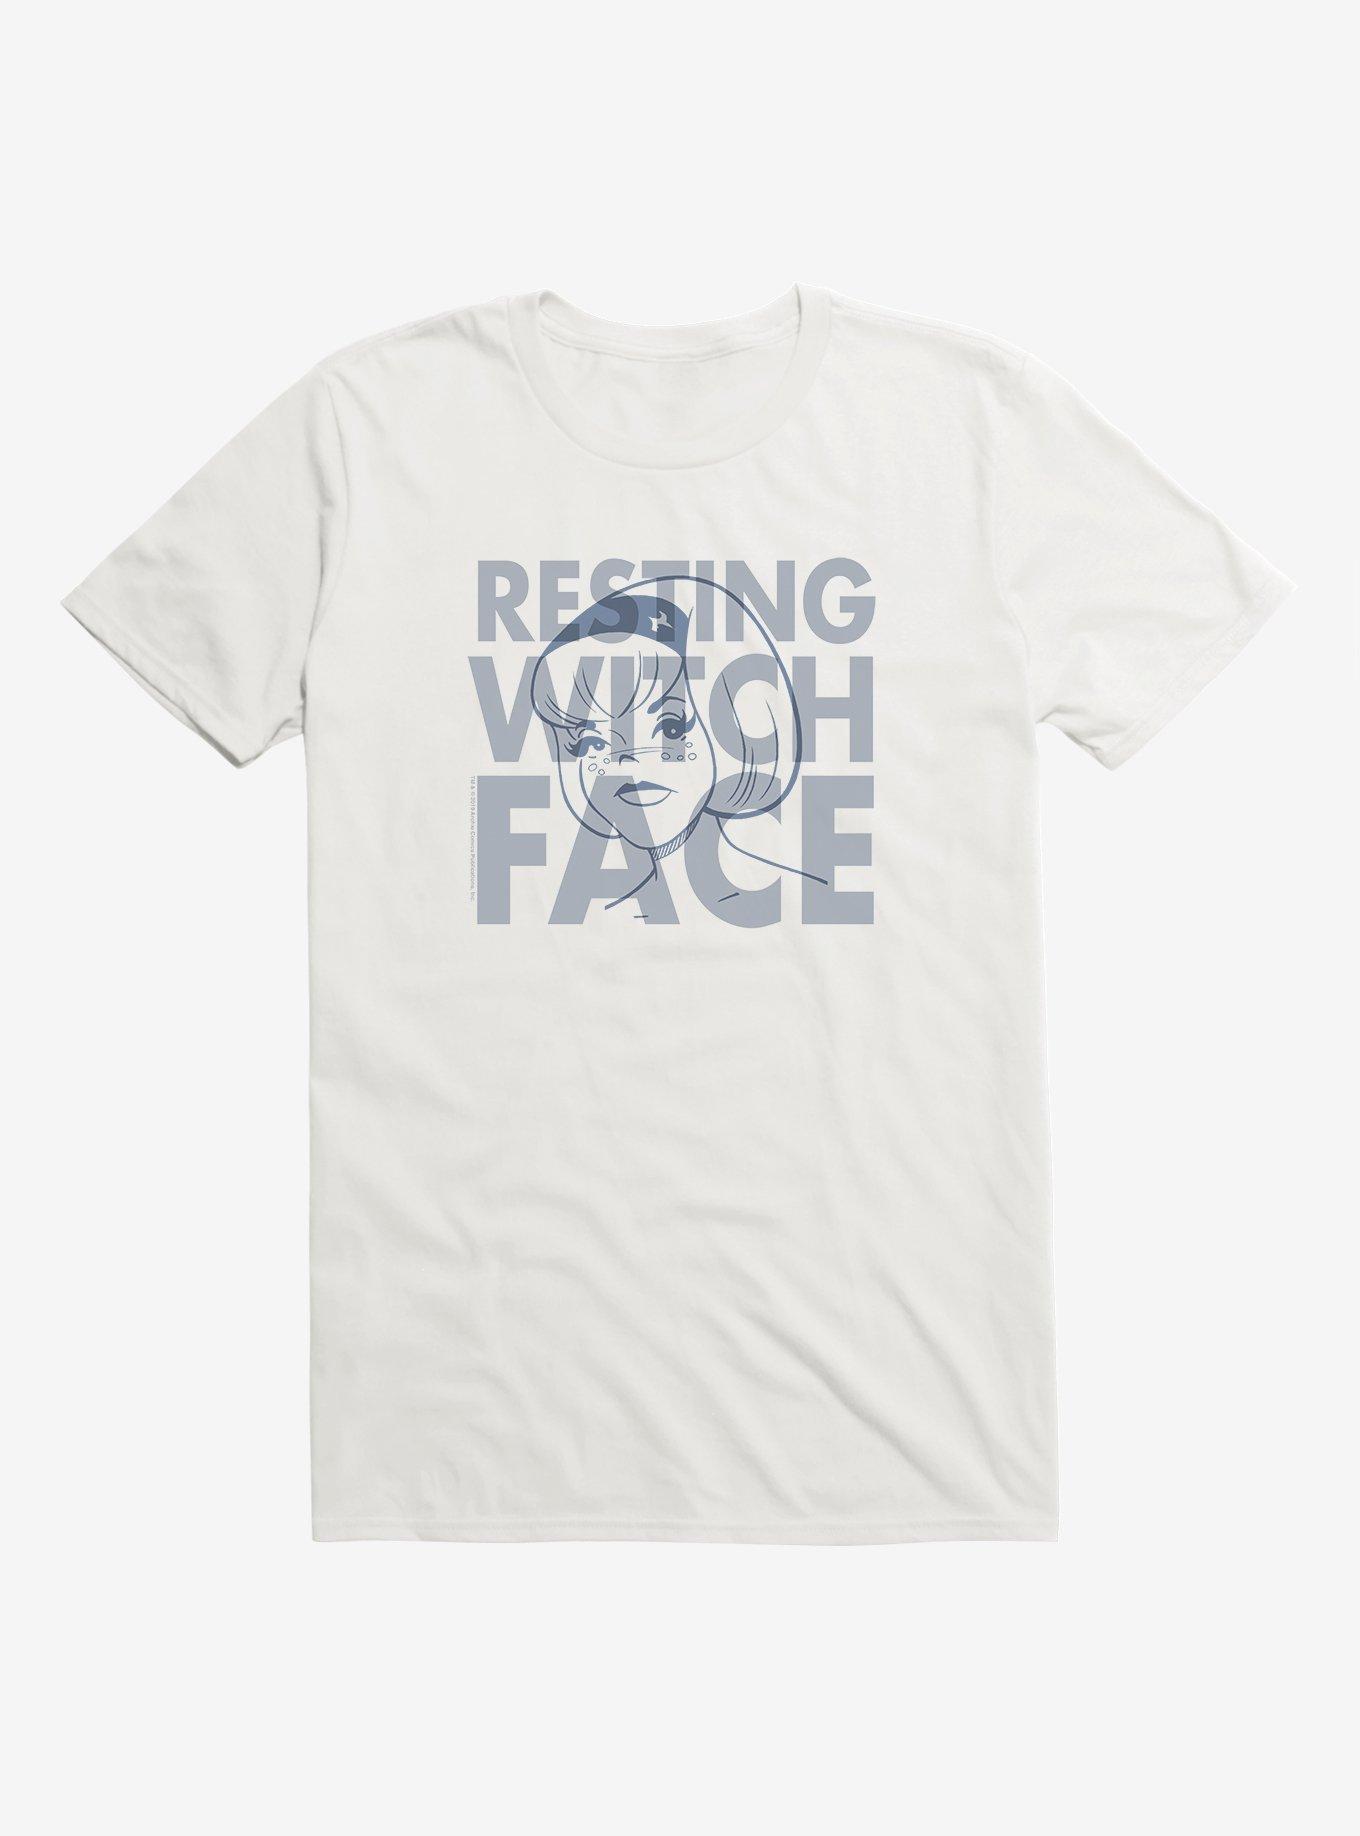 Archie Comics The Chilling Adventures Of Sabrina Resting Witch Face T-Shirt, WHITE, hi-res